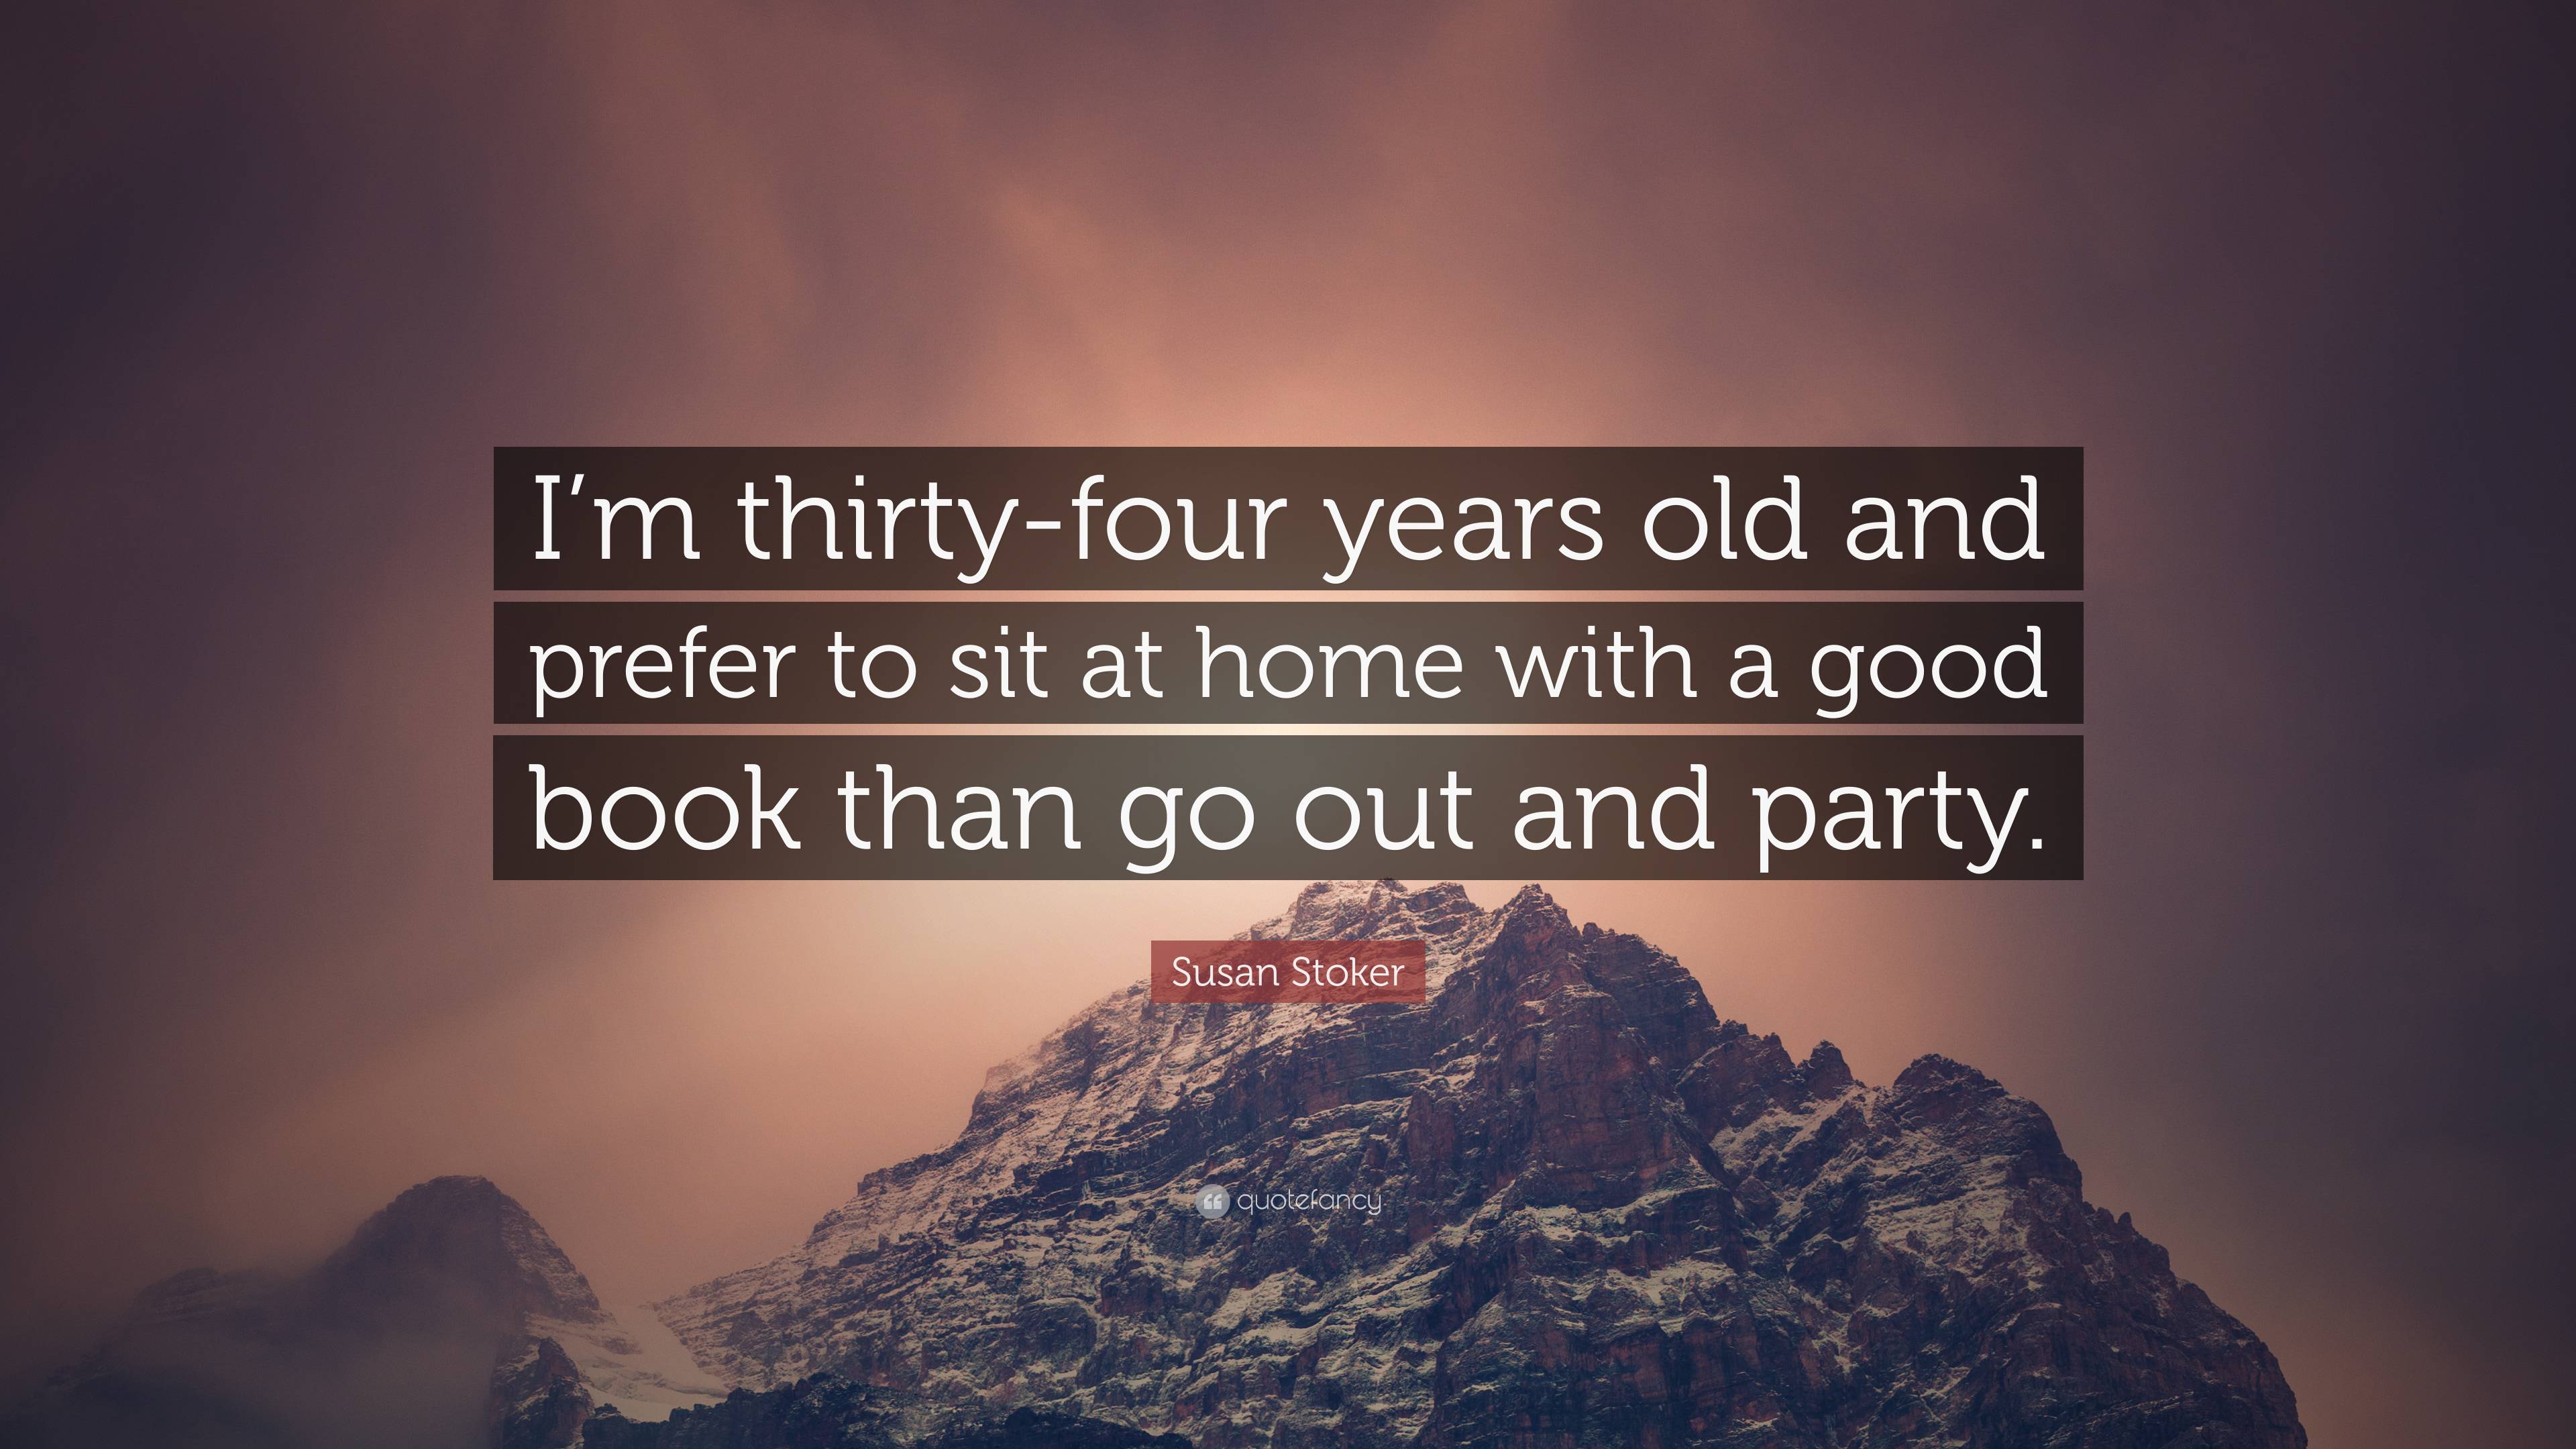 Susan Stoker Quote: “I’m thirty-four years old and prefer to sit at ...